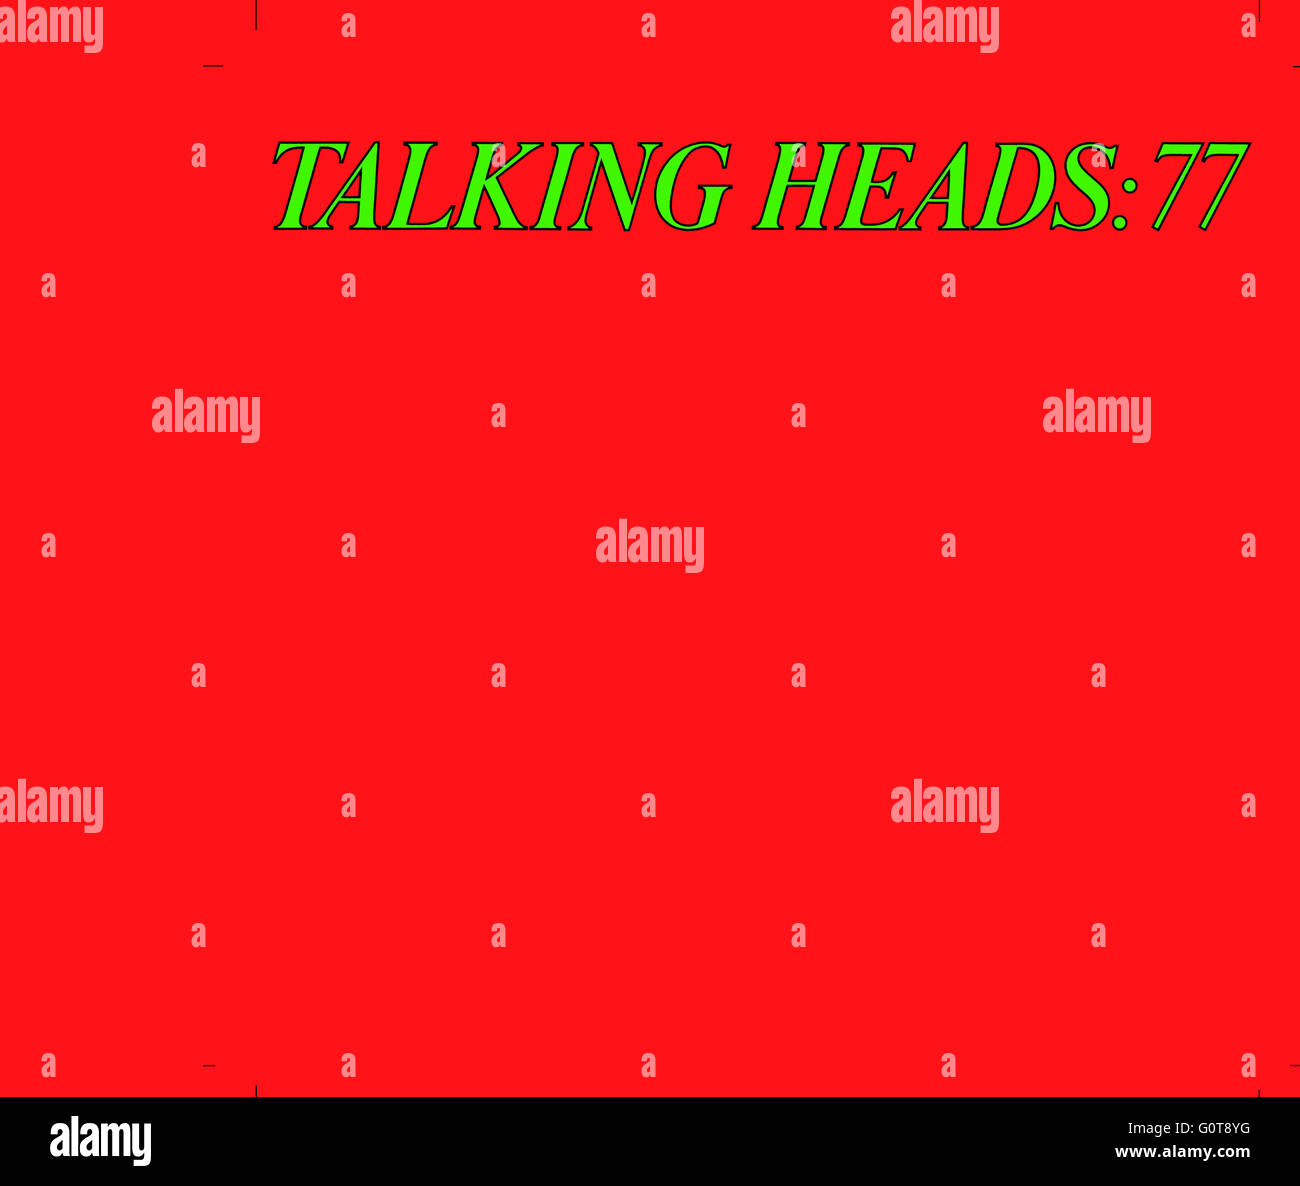 Cover of Talking Heads album' 'Talking Heads: 77' Stock Photo